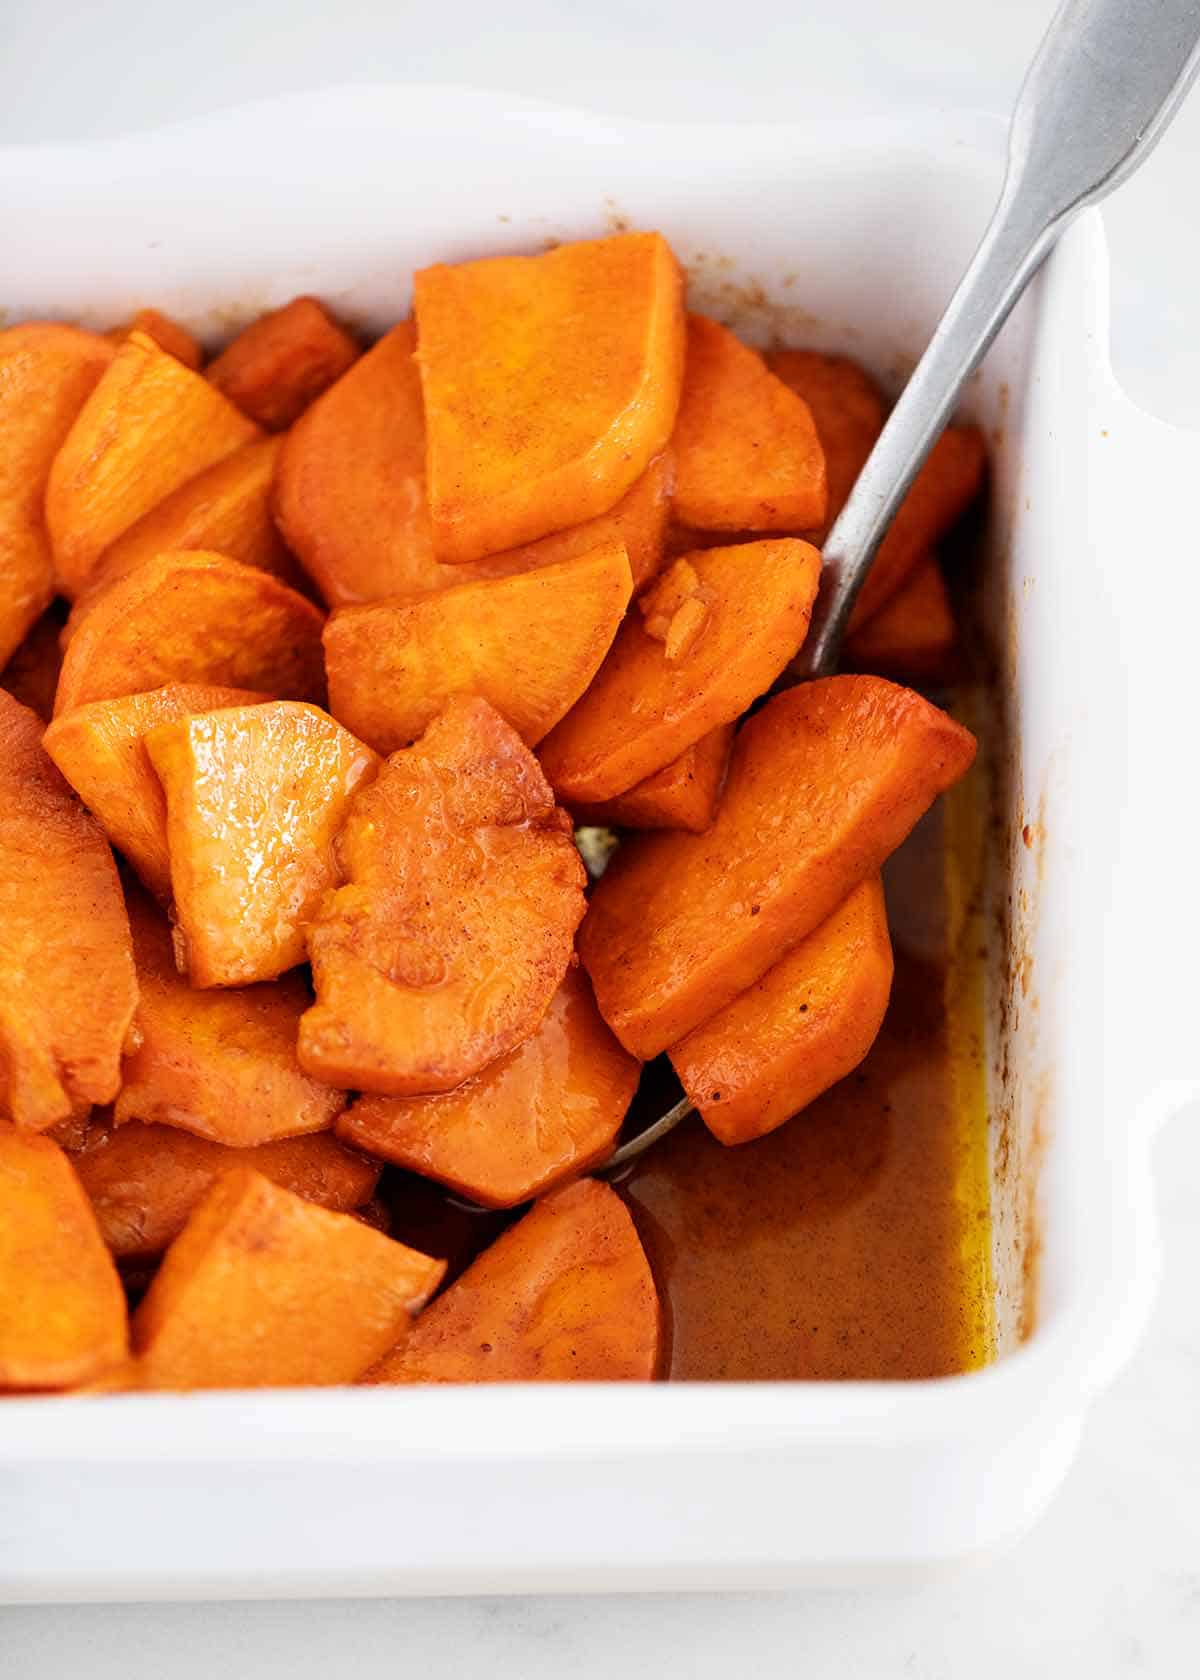 Candied yams in white baking dish.